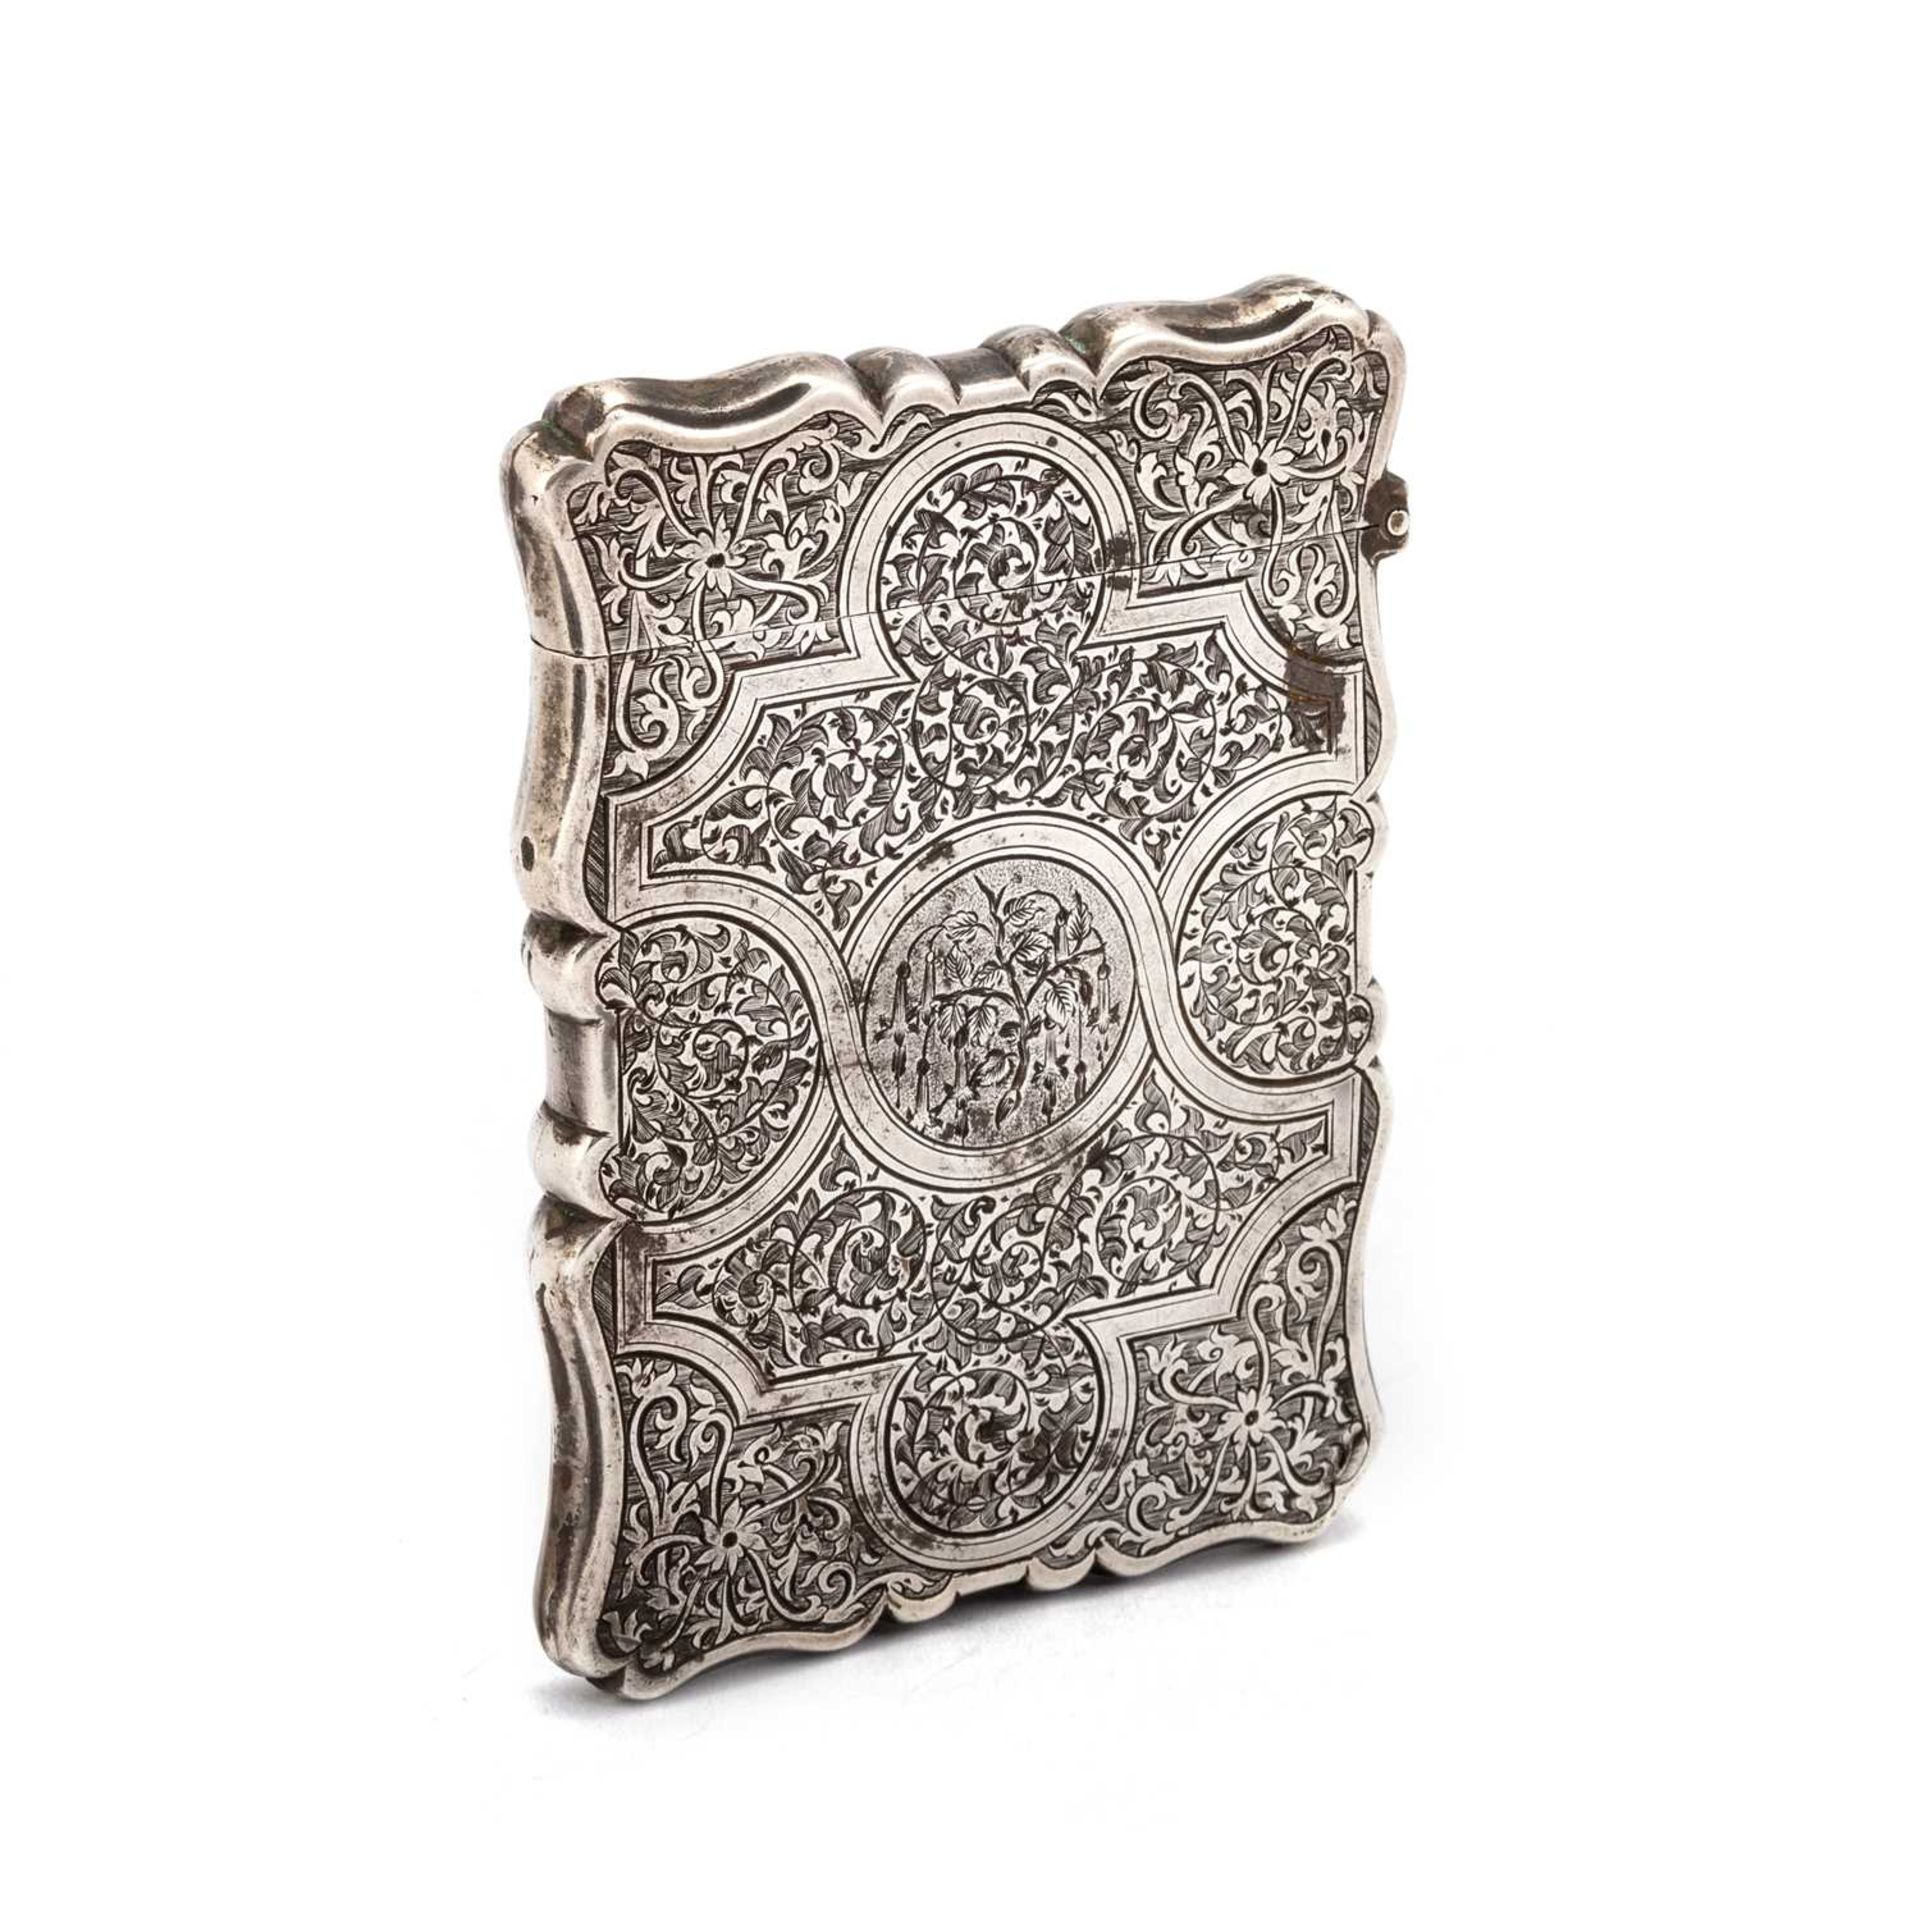 A VICTORIAN SILVER CARD CASE - Image 2 of 2